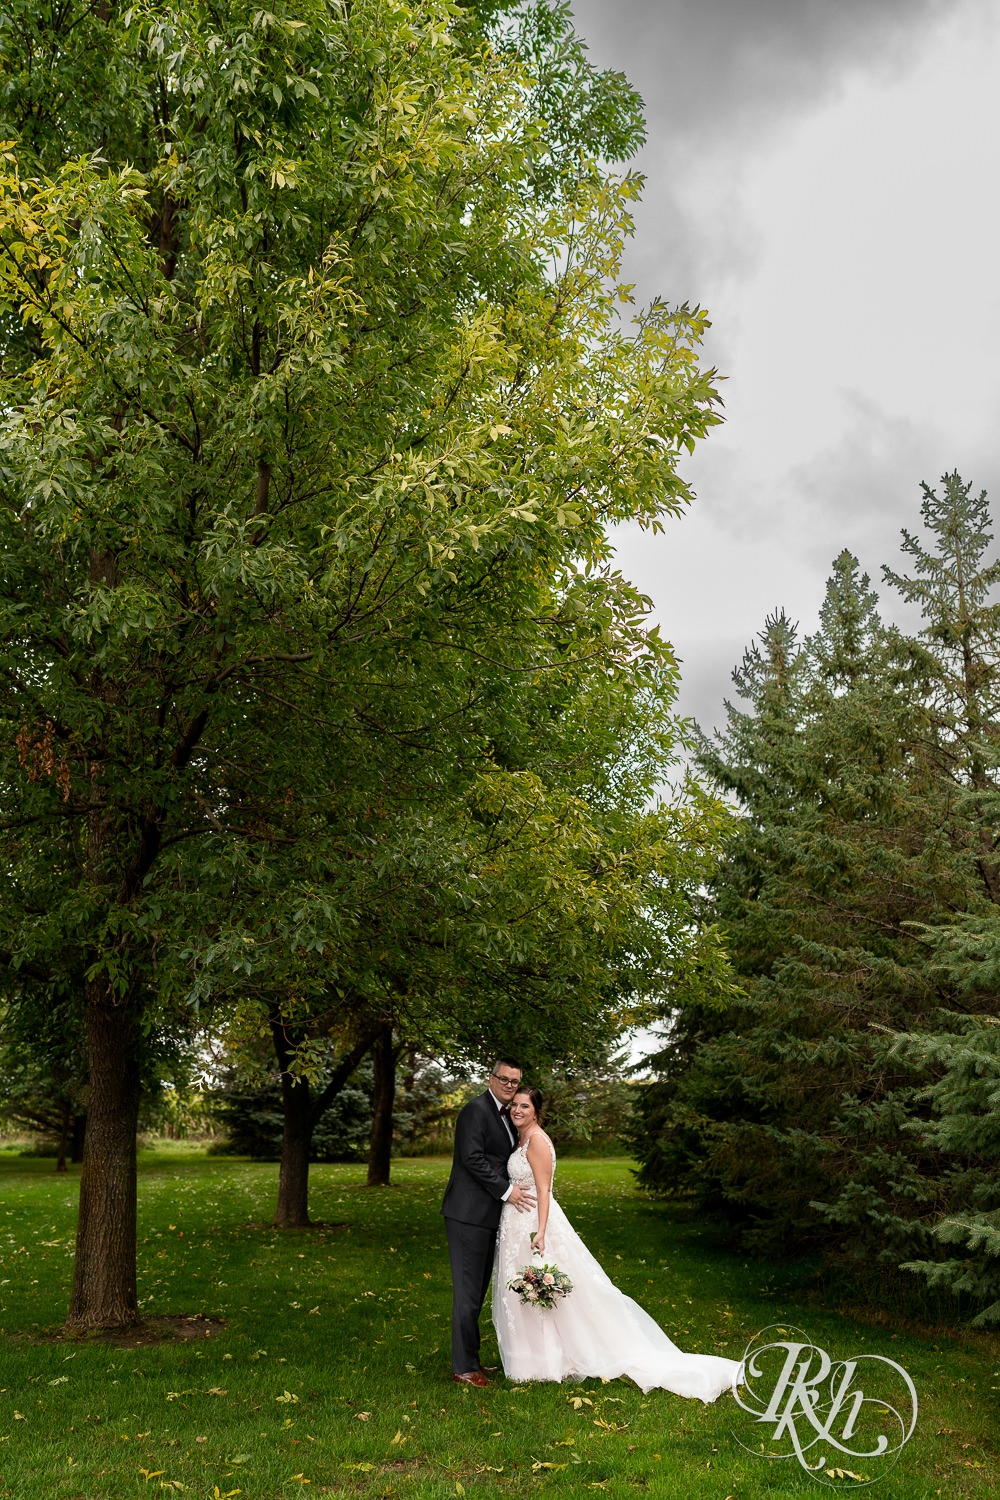 Bride and groom together on rainy day at Glenhaven Events in Farmington, Minnesota under a tree.